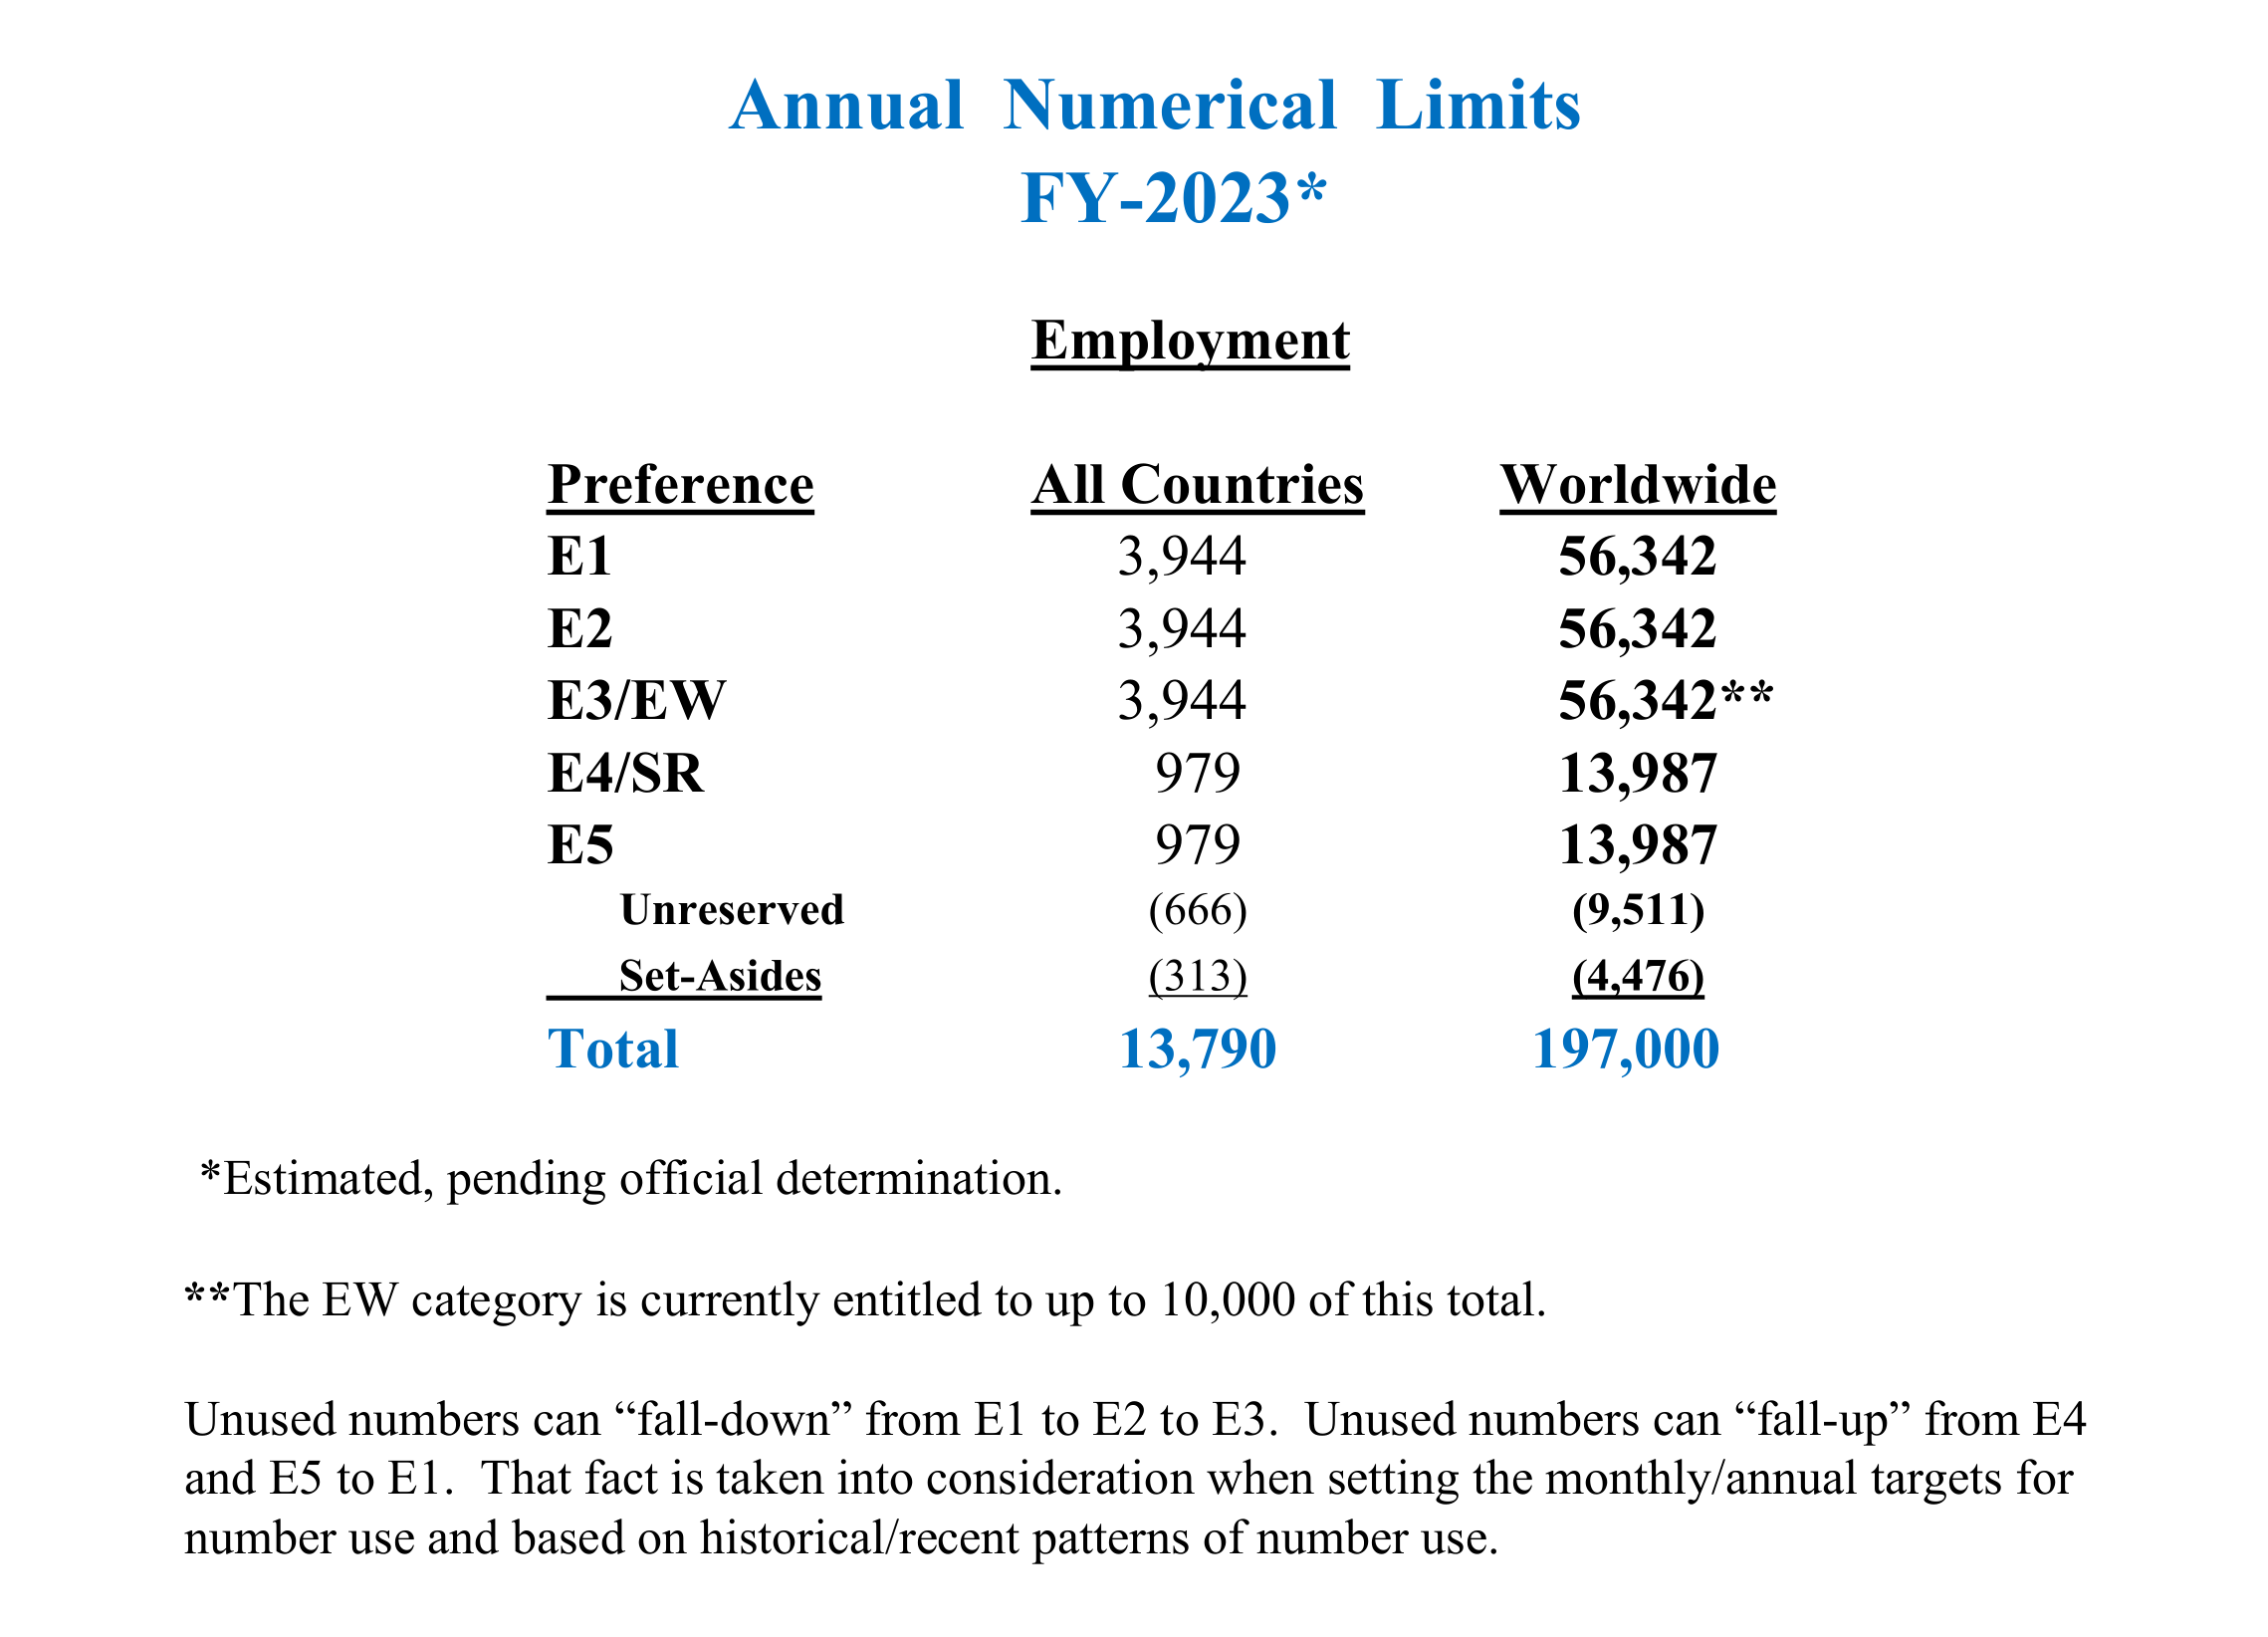 Annual  Numerical  Limits - FY 2023_12.png